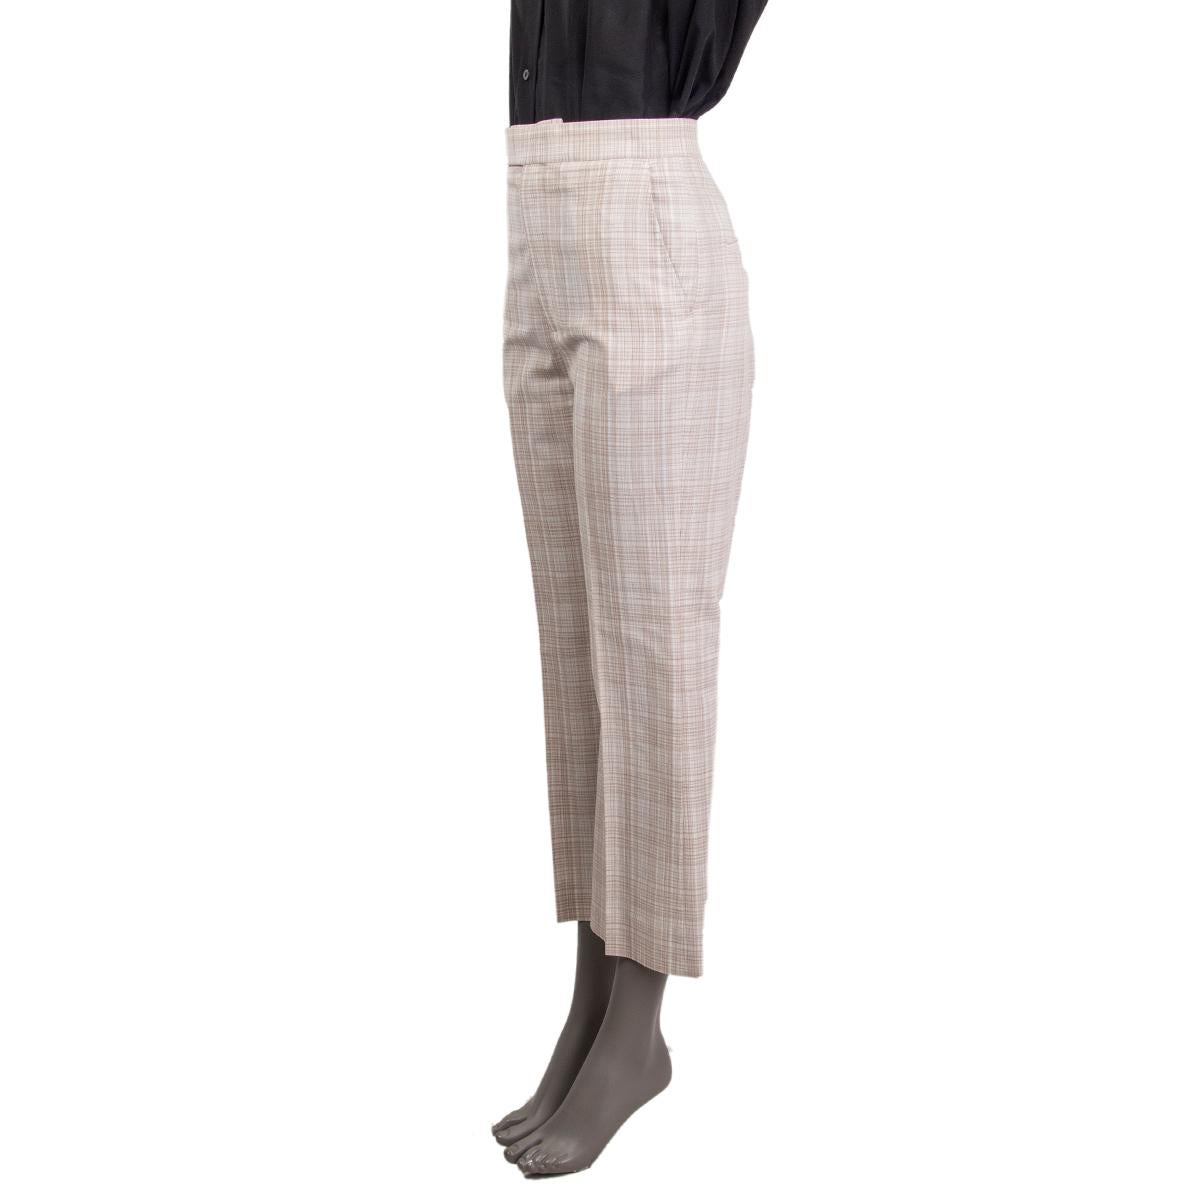 100% authentic Céline plaid tapered pants in off-white and light brown linen (55%), cotton (21%), viscose (21%) and polyamide (3%) with pockets. Close on the front with a zipper and hook fasteners. Partially lined in cotton (100%). Have been worn